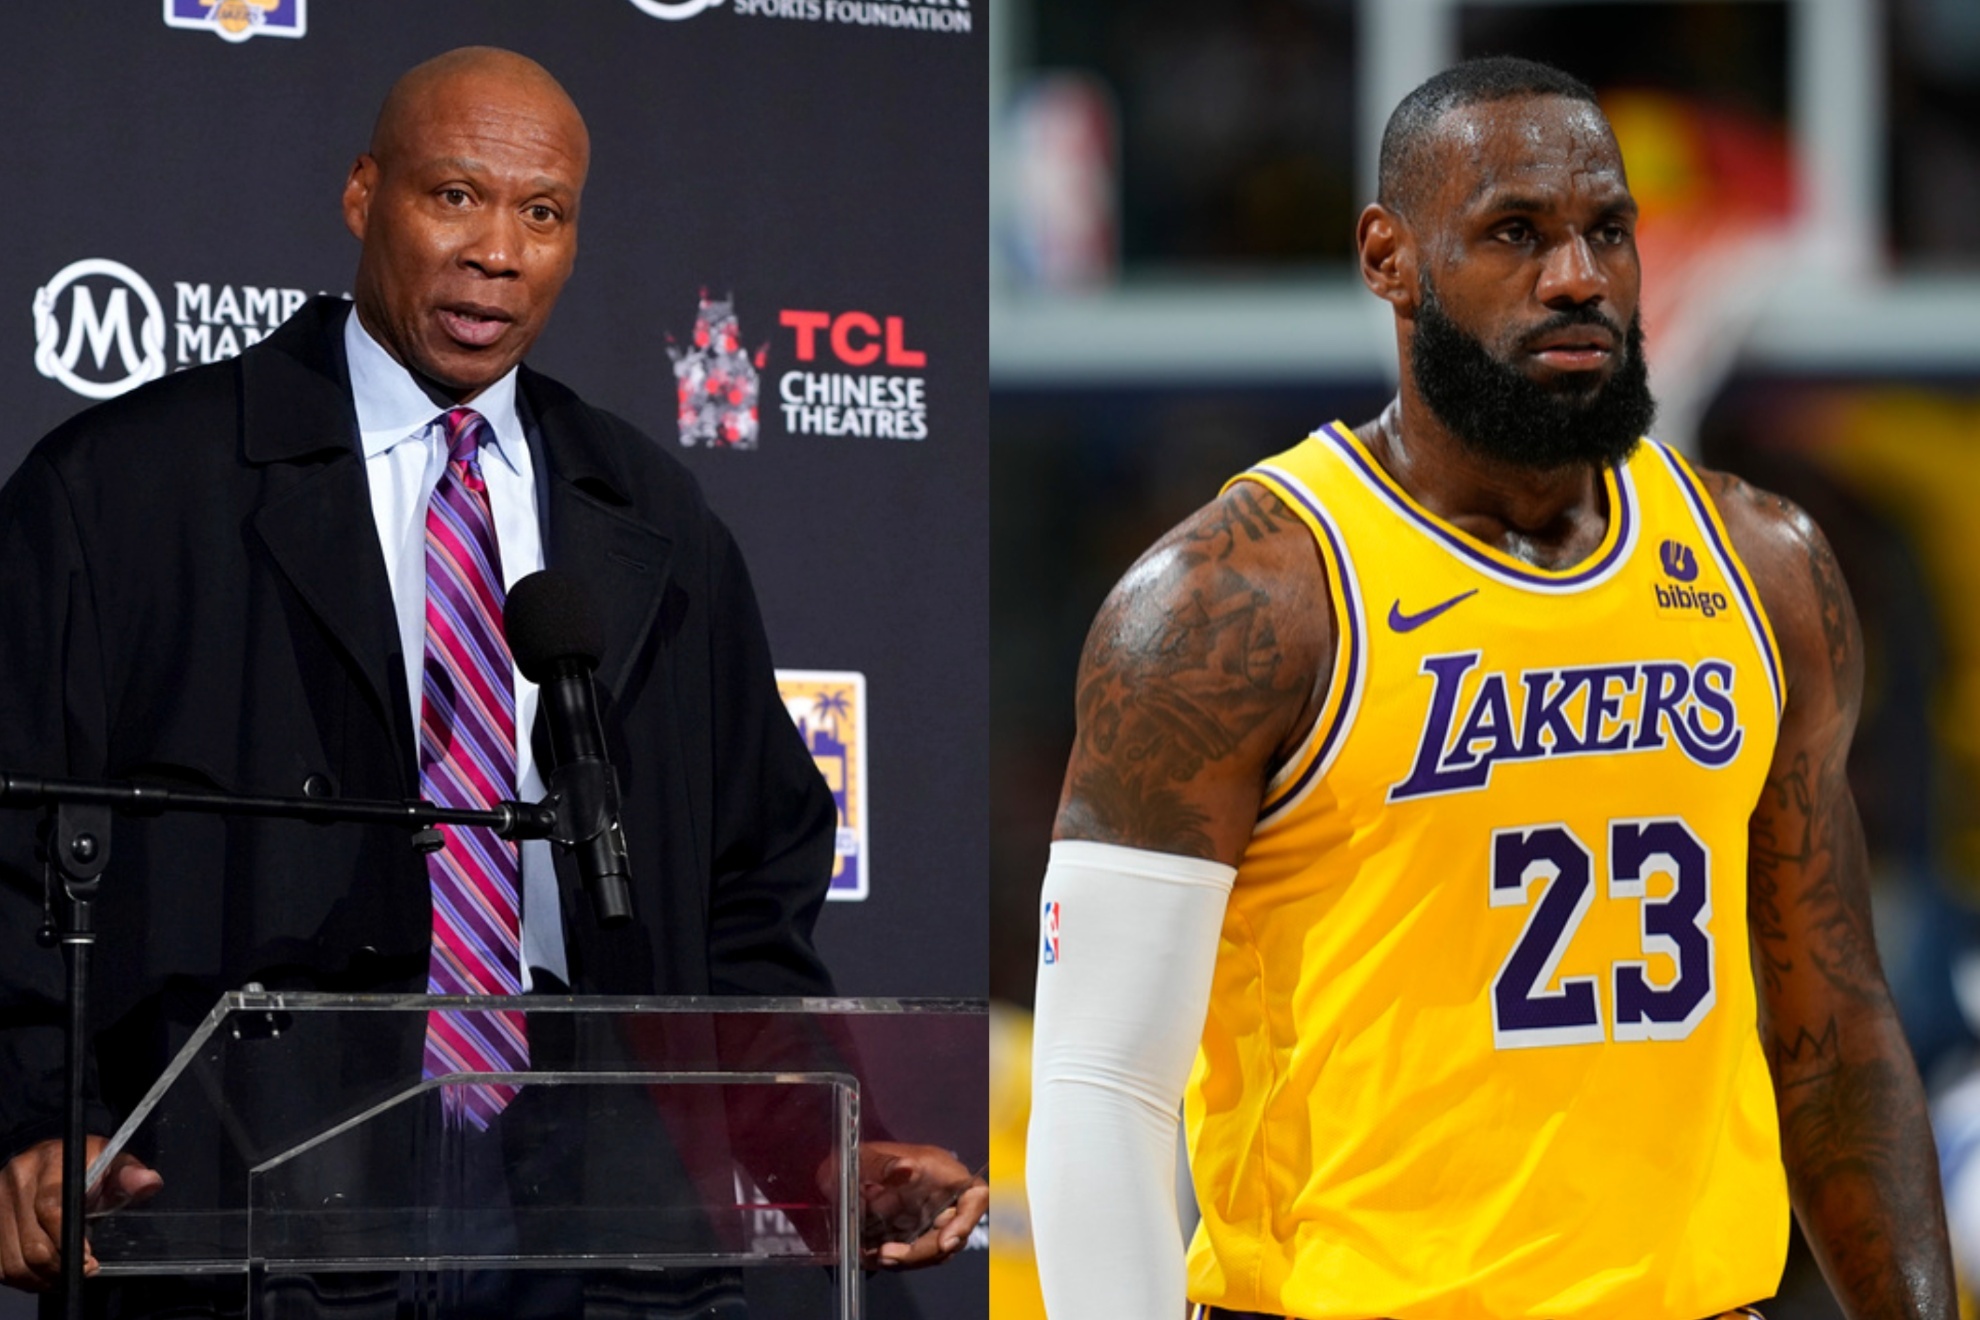 lebron james receives a slap on the wrist from an la lakers legend, challenges him to coach the team